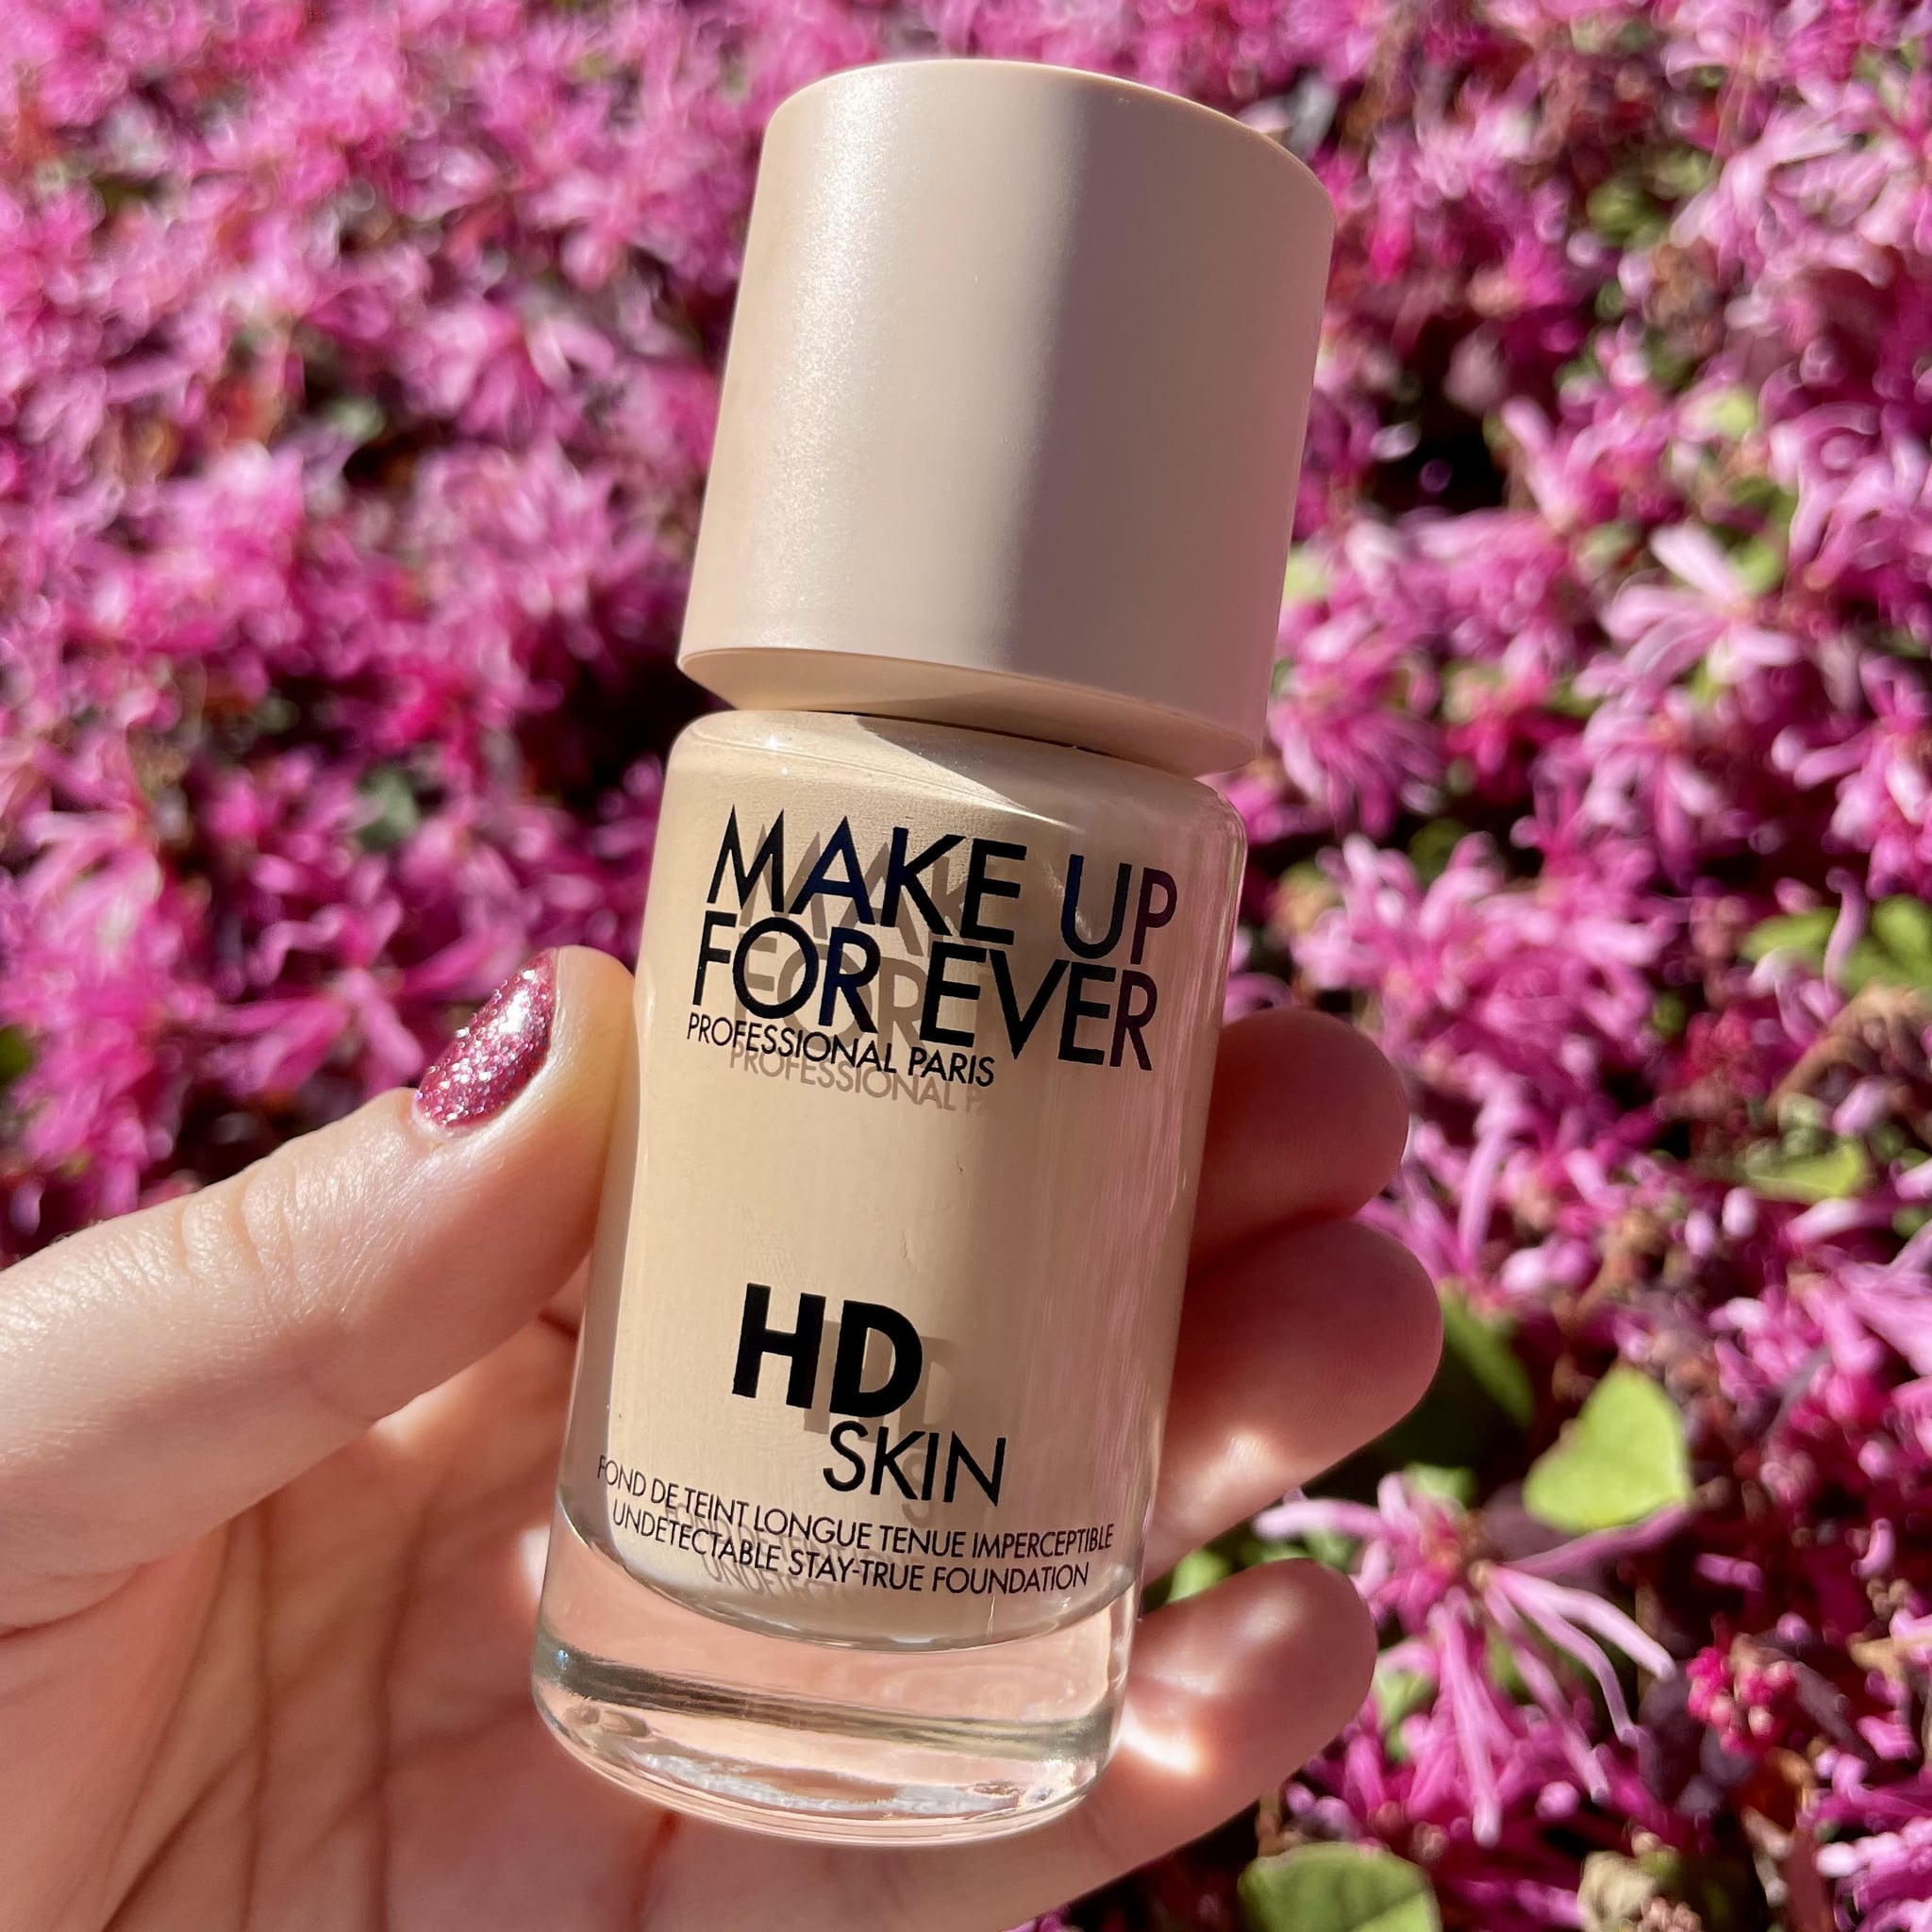 4 Editors Review New Make Up For Ever HD Skin Foundation | Beauty